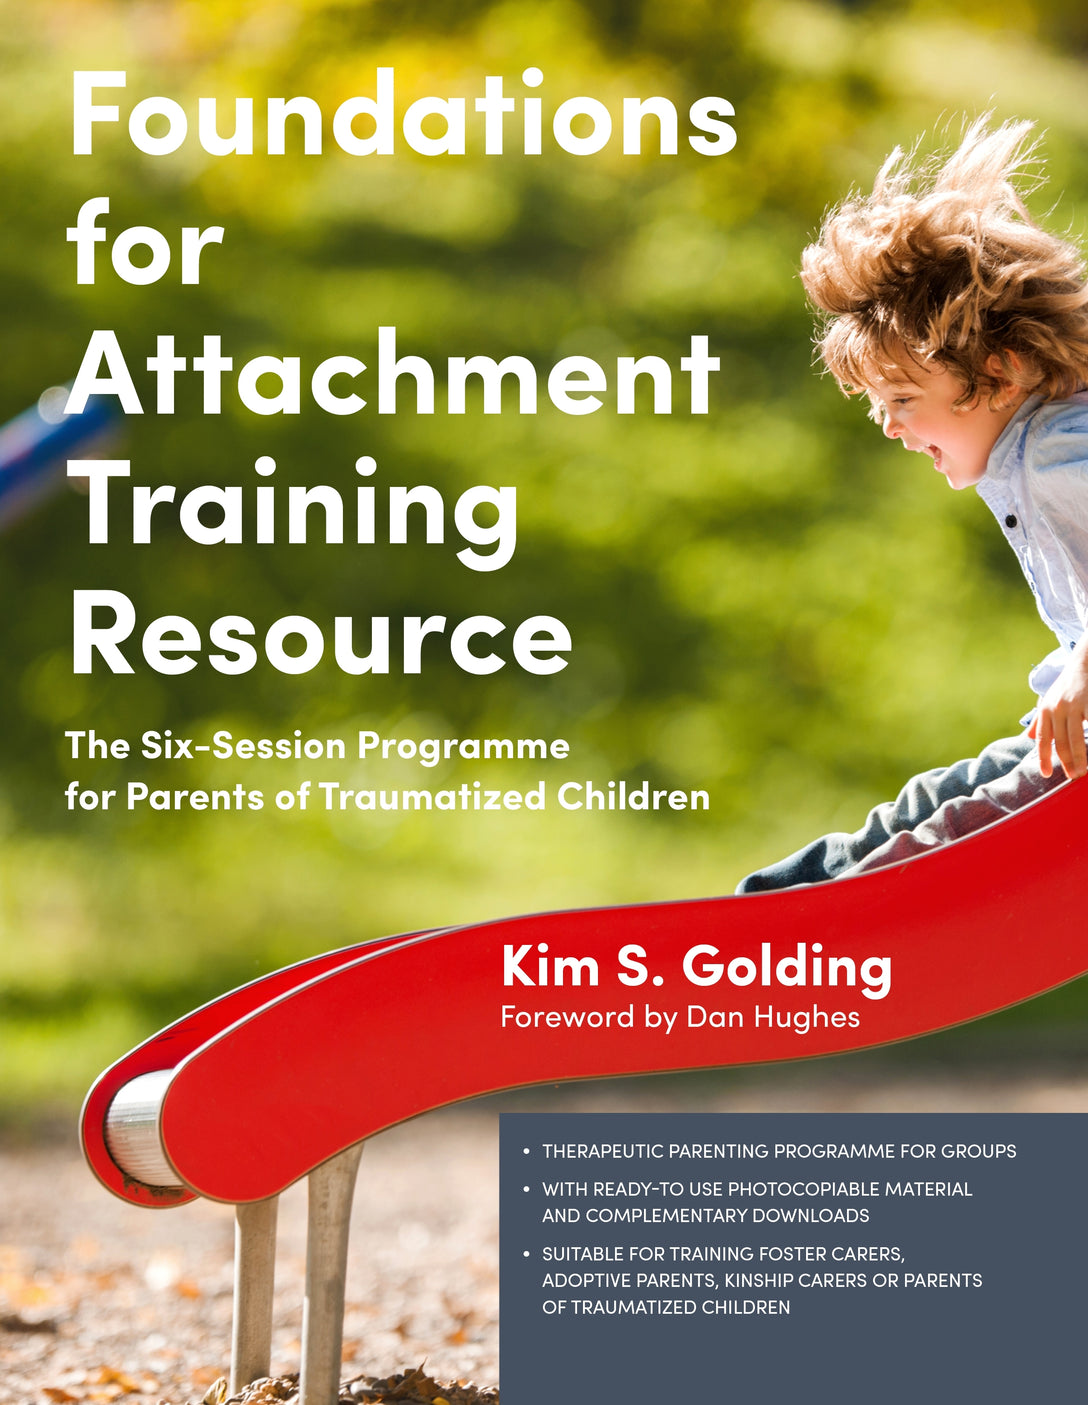 Foundations for Attachment Training Resource by Kim S. Golding, Dan Hughes